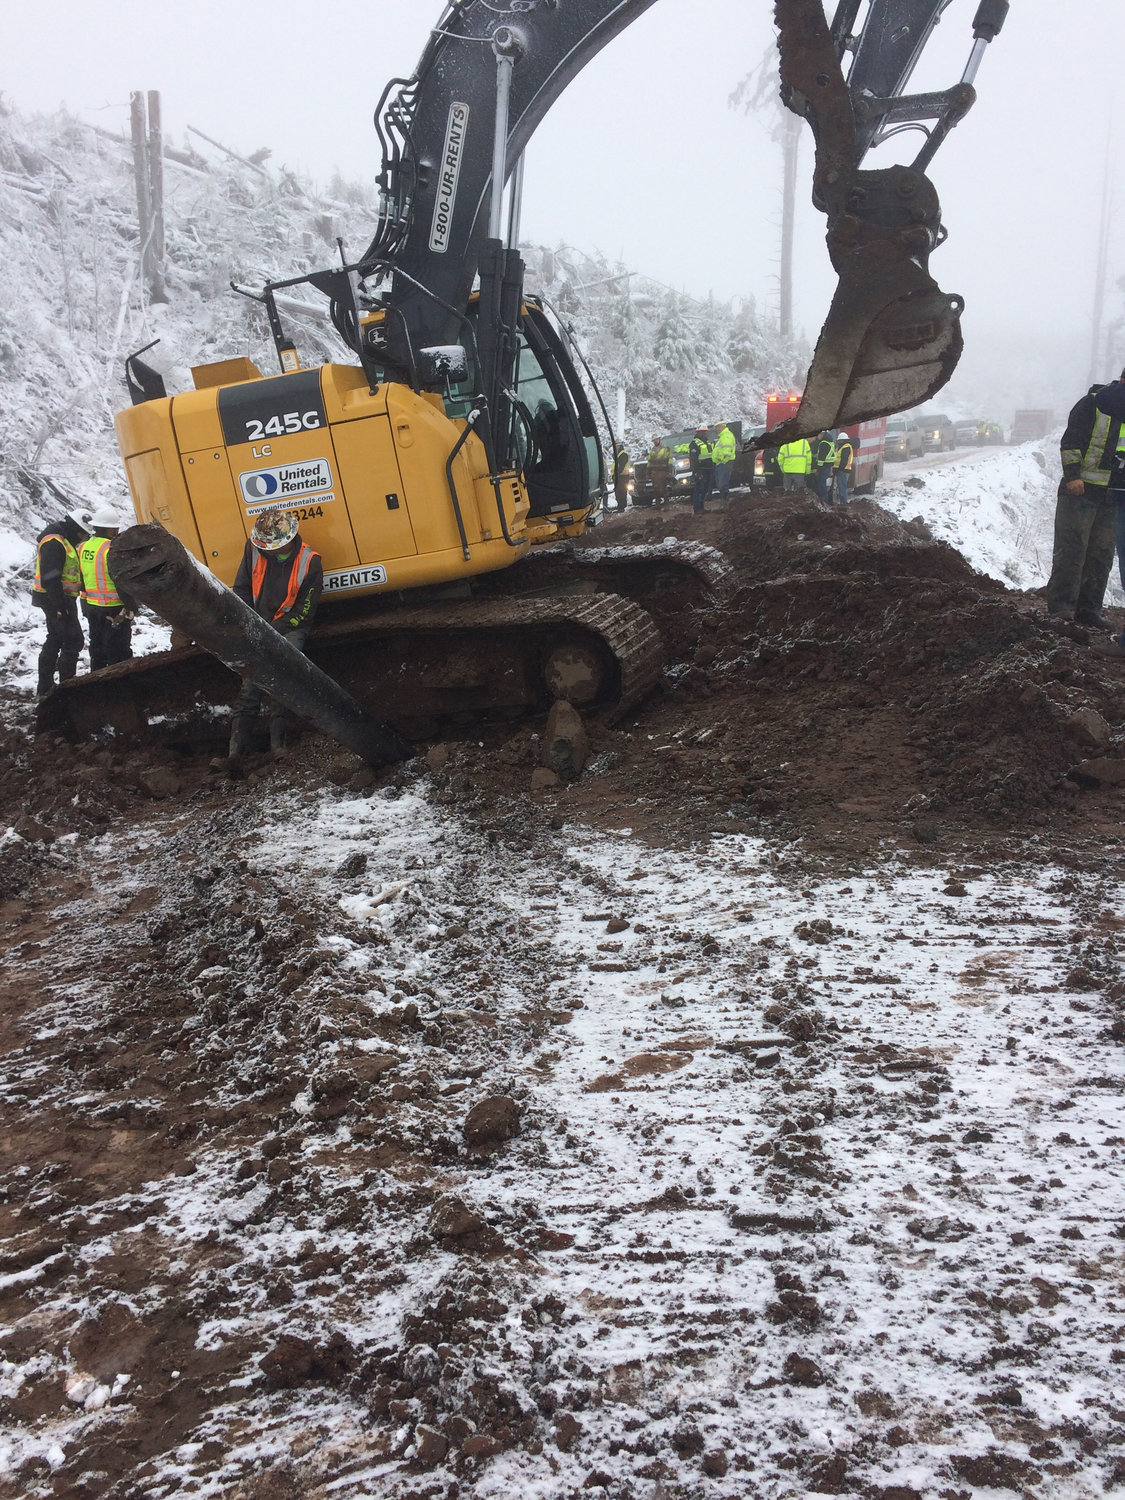 A three-man team at the Skookumchuck Wind Farm was attempting to slip a sleeve underneath a culvert about 15-feet deep. A trench collapse killed Jonathan Stringer, a 24-year-old Chehalis man, and critically injured one other worker who was transported from the lay-down yard in Vail to Harborview.